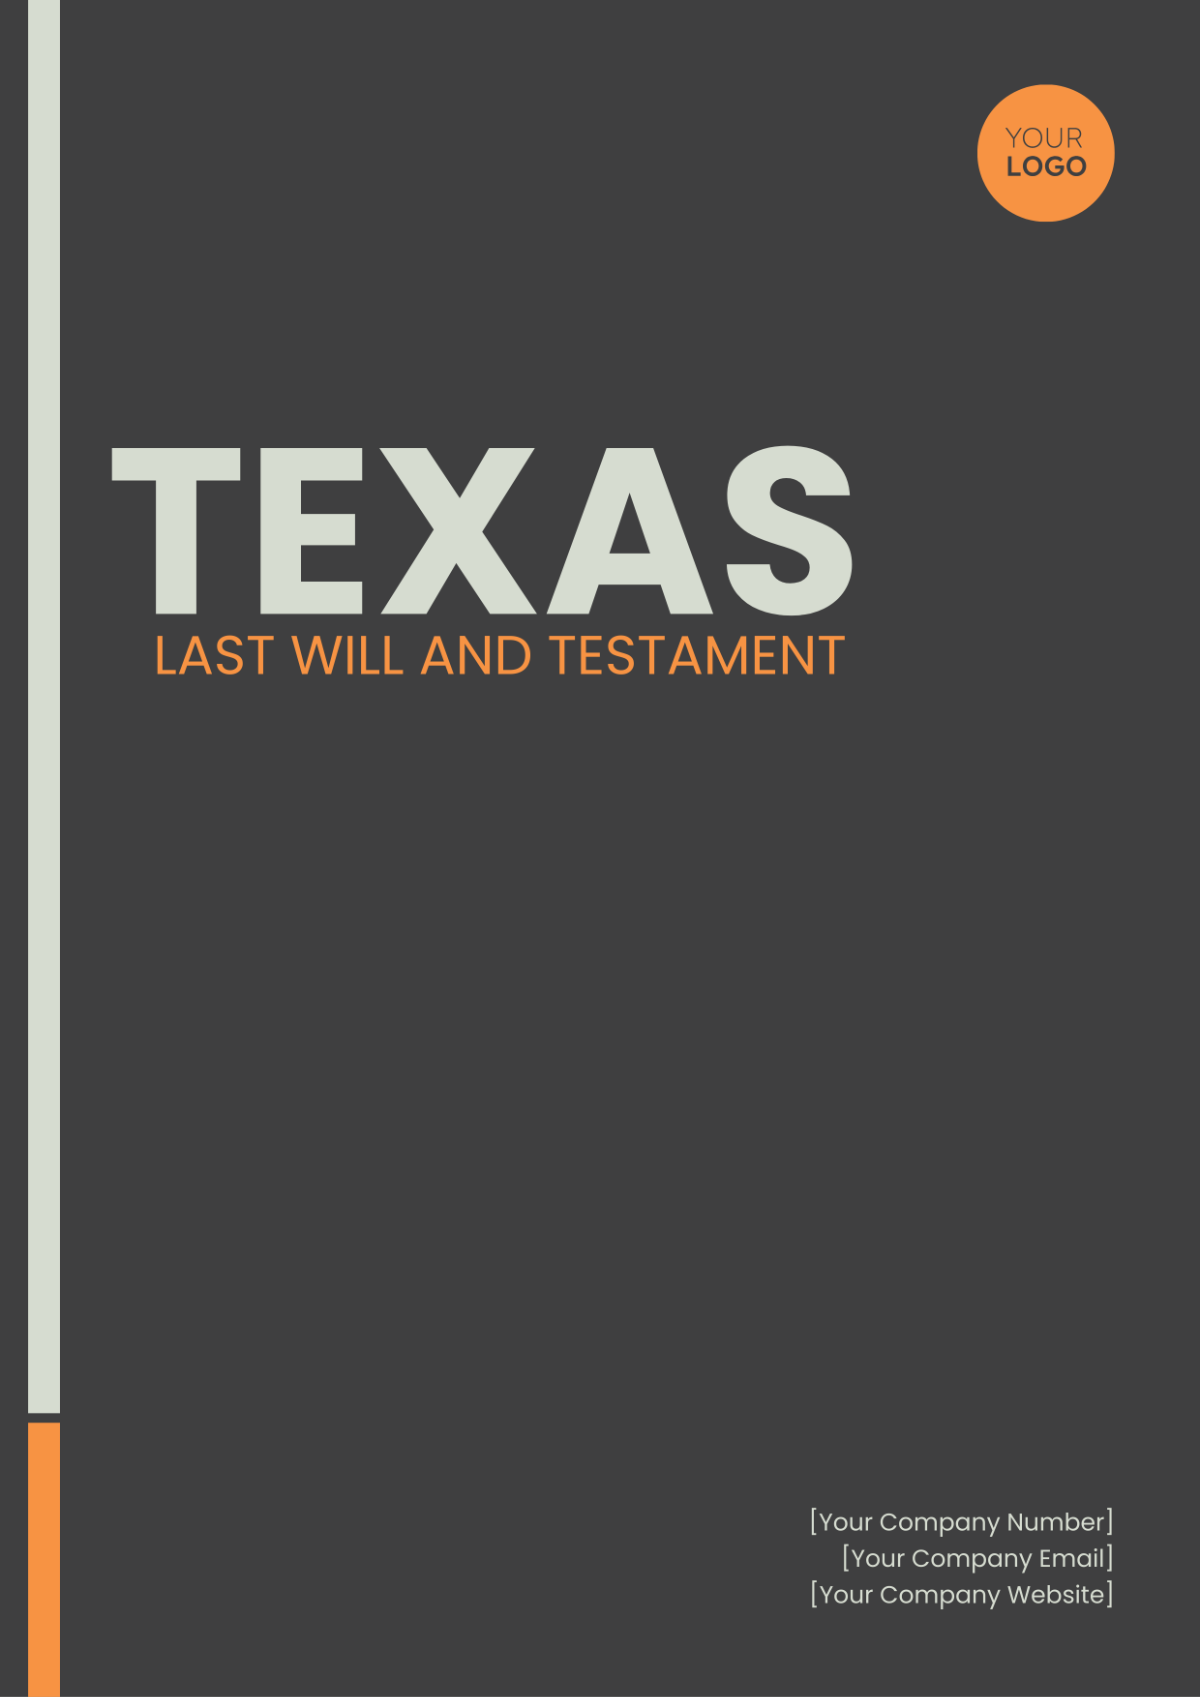 Texas Last Will and Testament Template